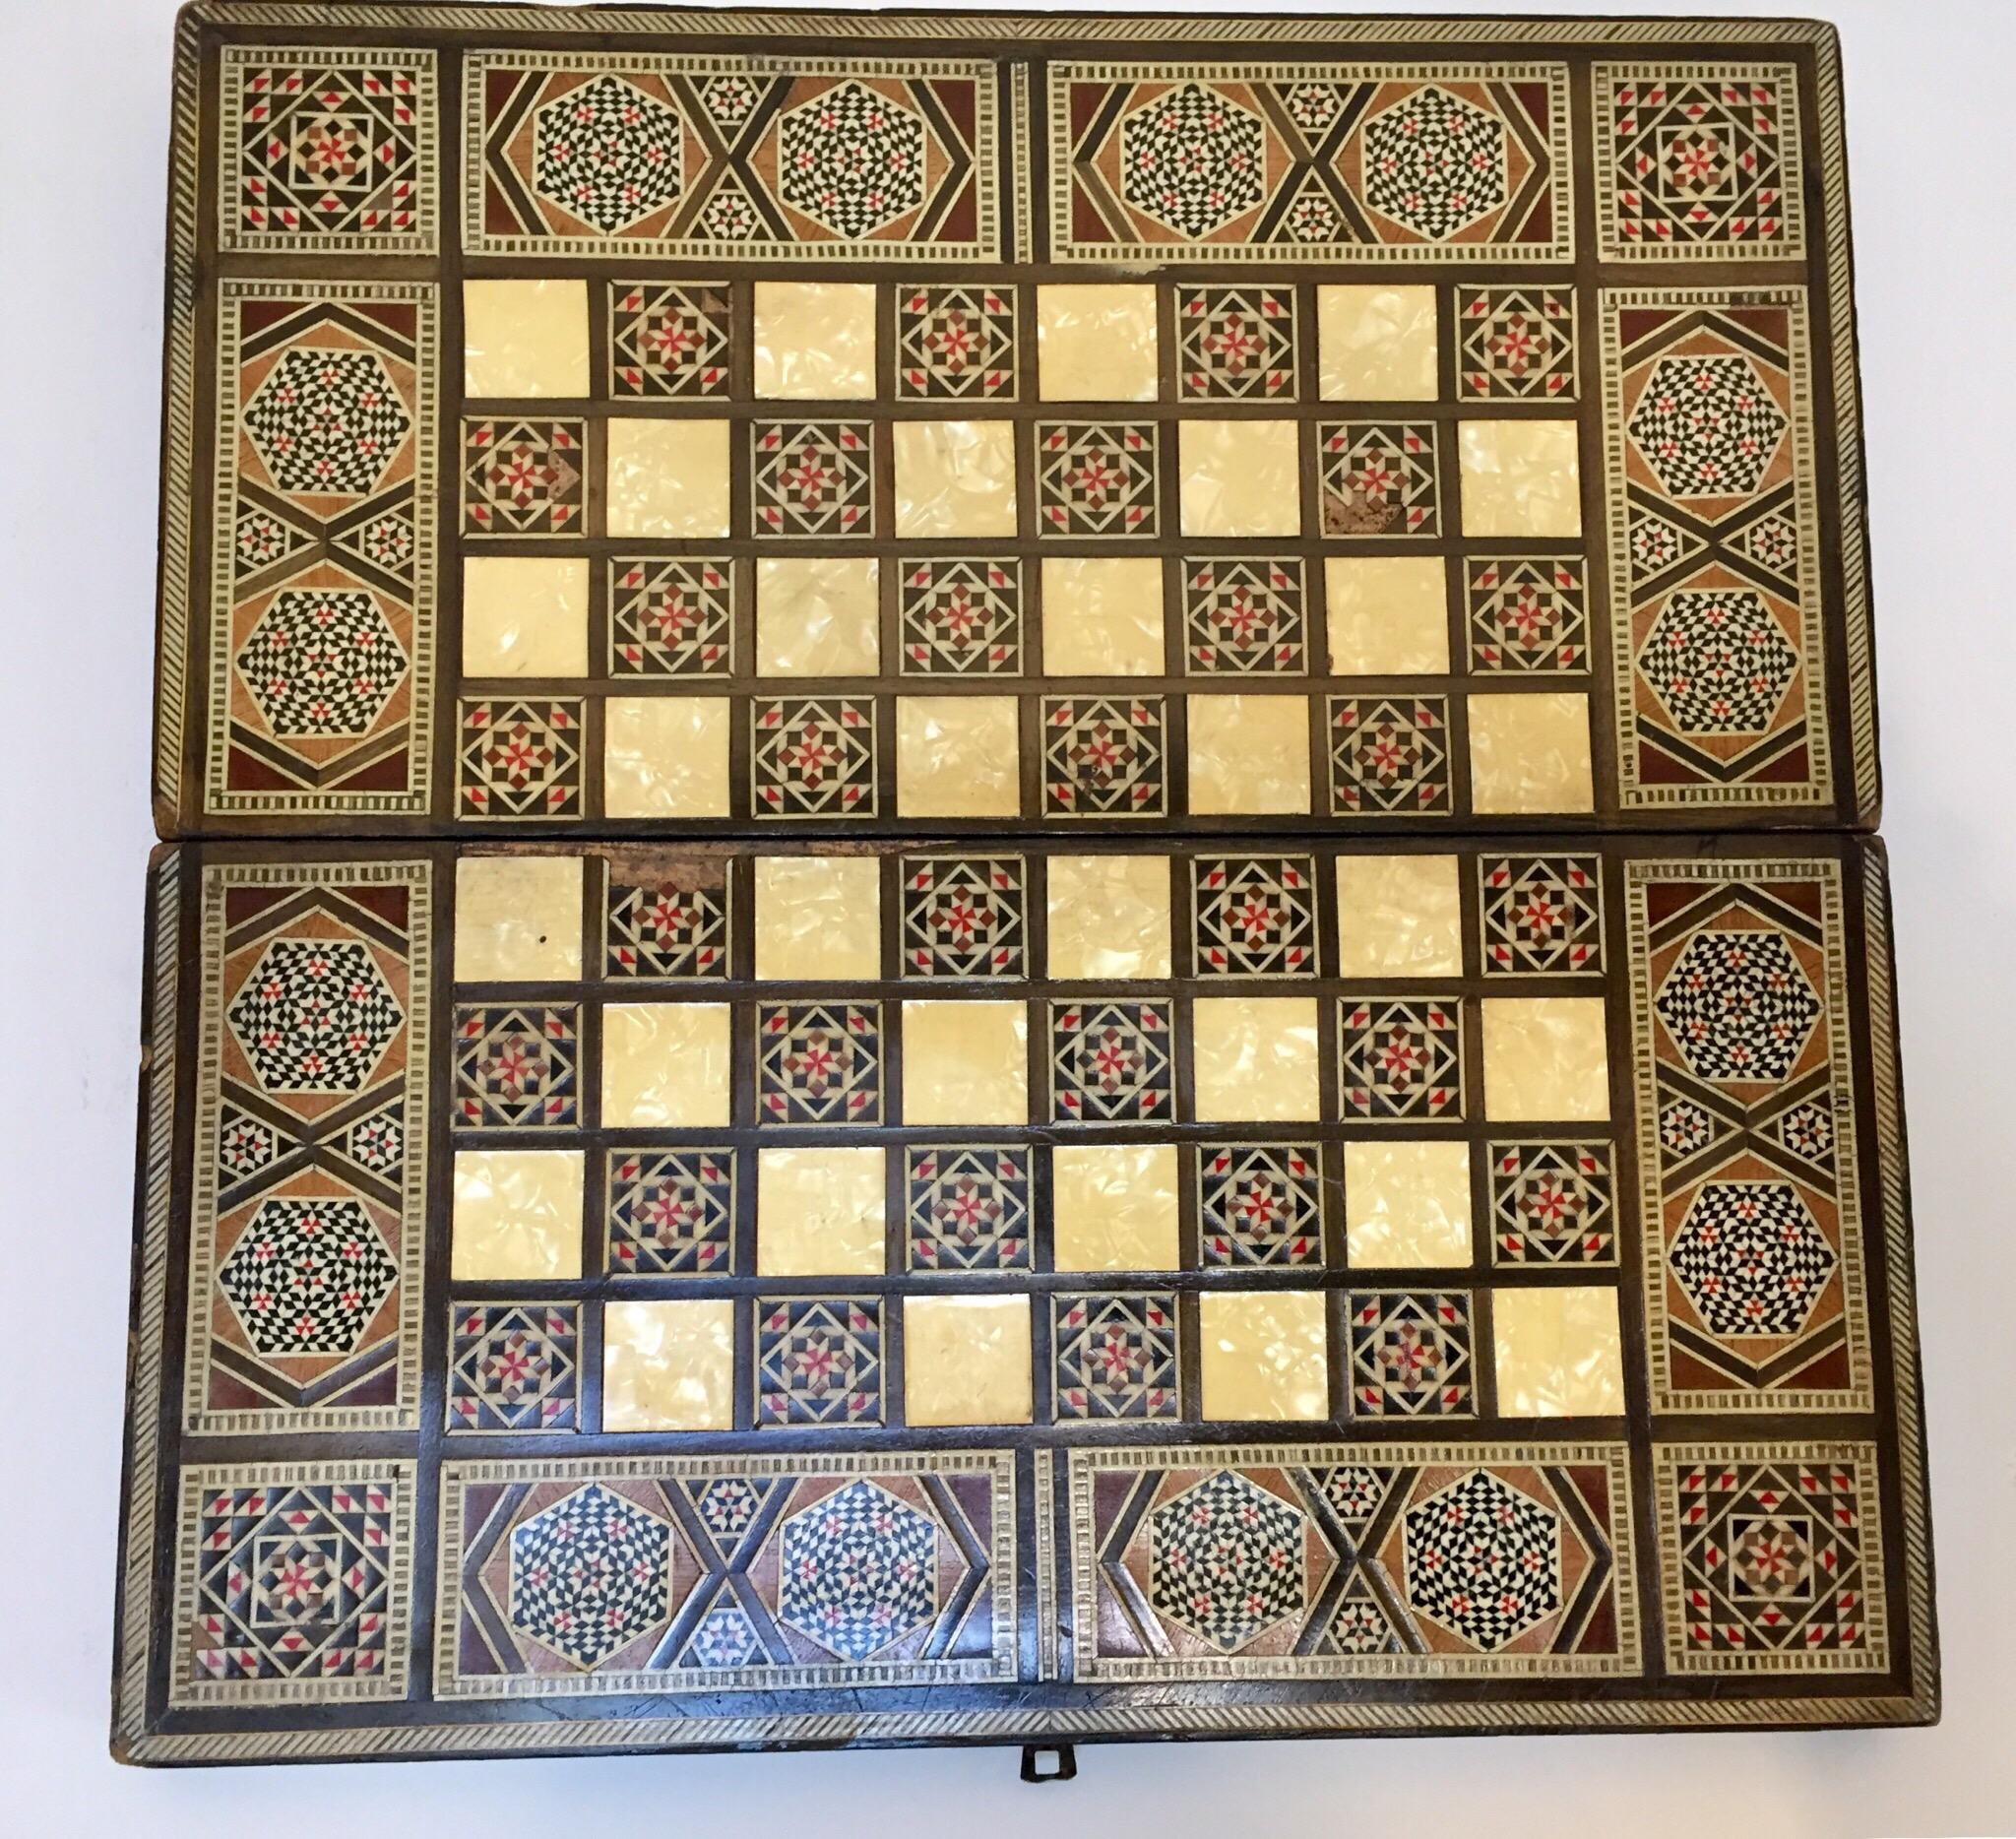 Large vintage Syrian inlaid marquetry mosaic backgammon and chess game box.
Amazing craftsmanship intricate marquetry in mosaic Moorish geometric pattern and mother-of-pearl inlay and fine precision makes it a true work of art.
Handcrafted in the